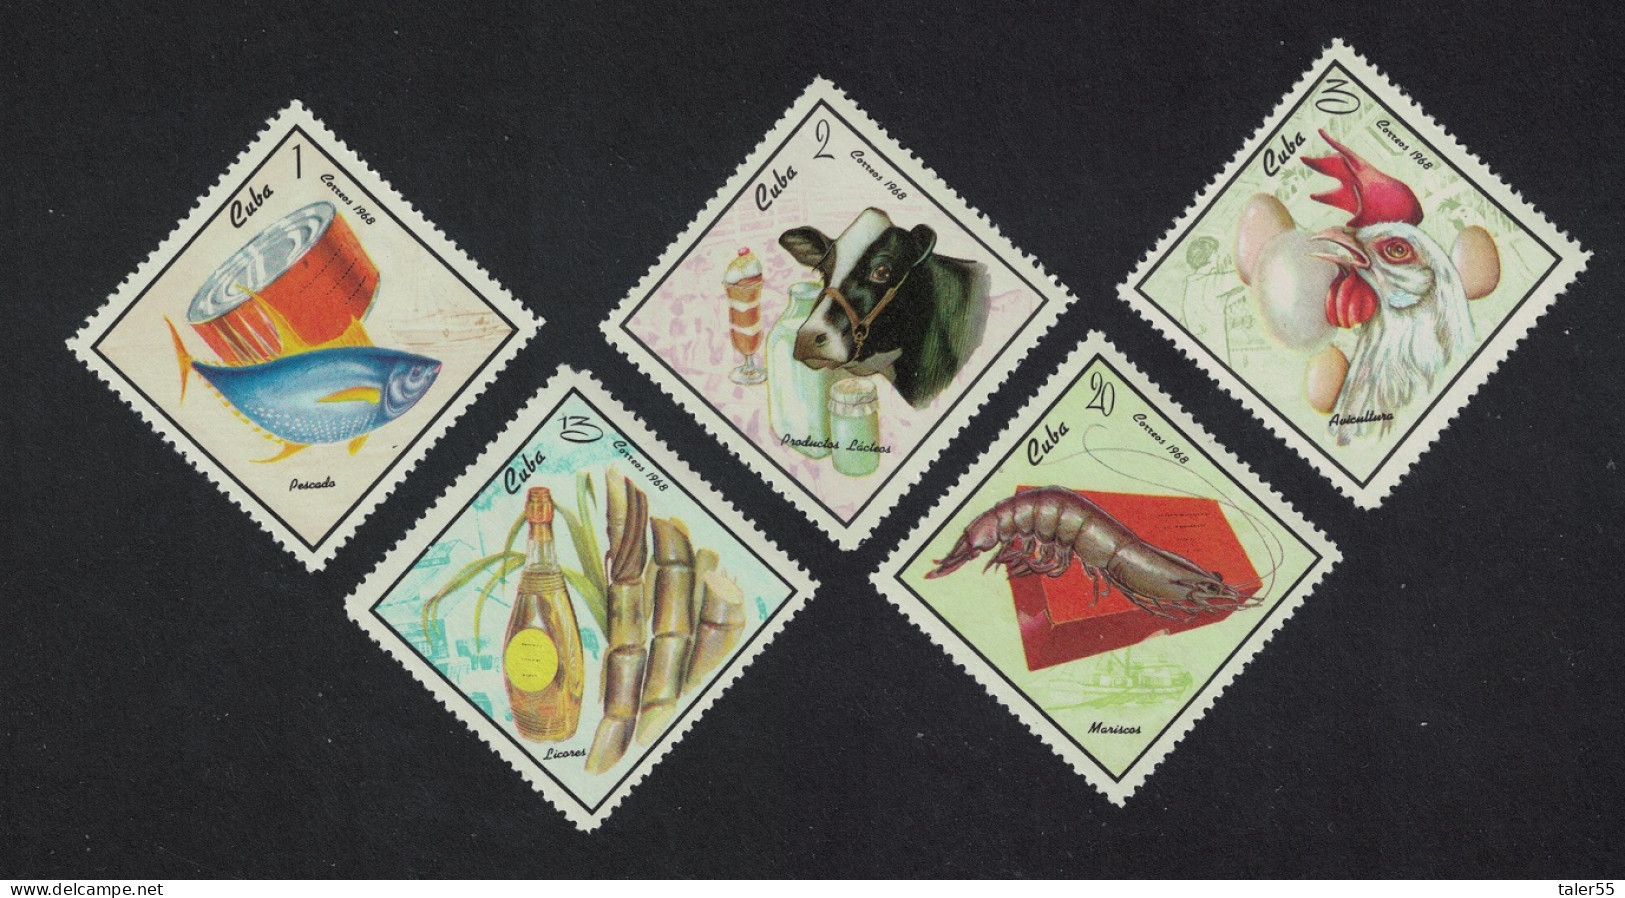 Caribic Fish Shellfish Rum Poultry Food Products 5v 1968 MNH SG#1582-1586 - Unused Stamps